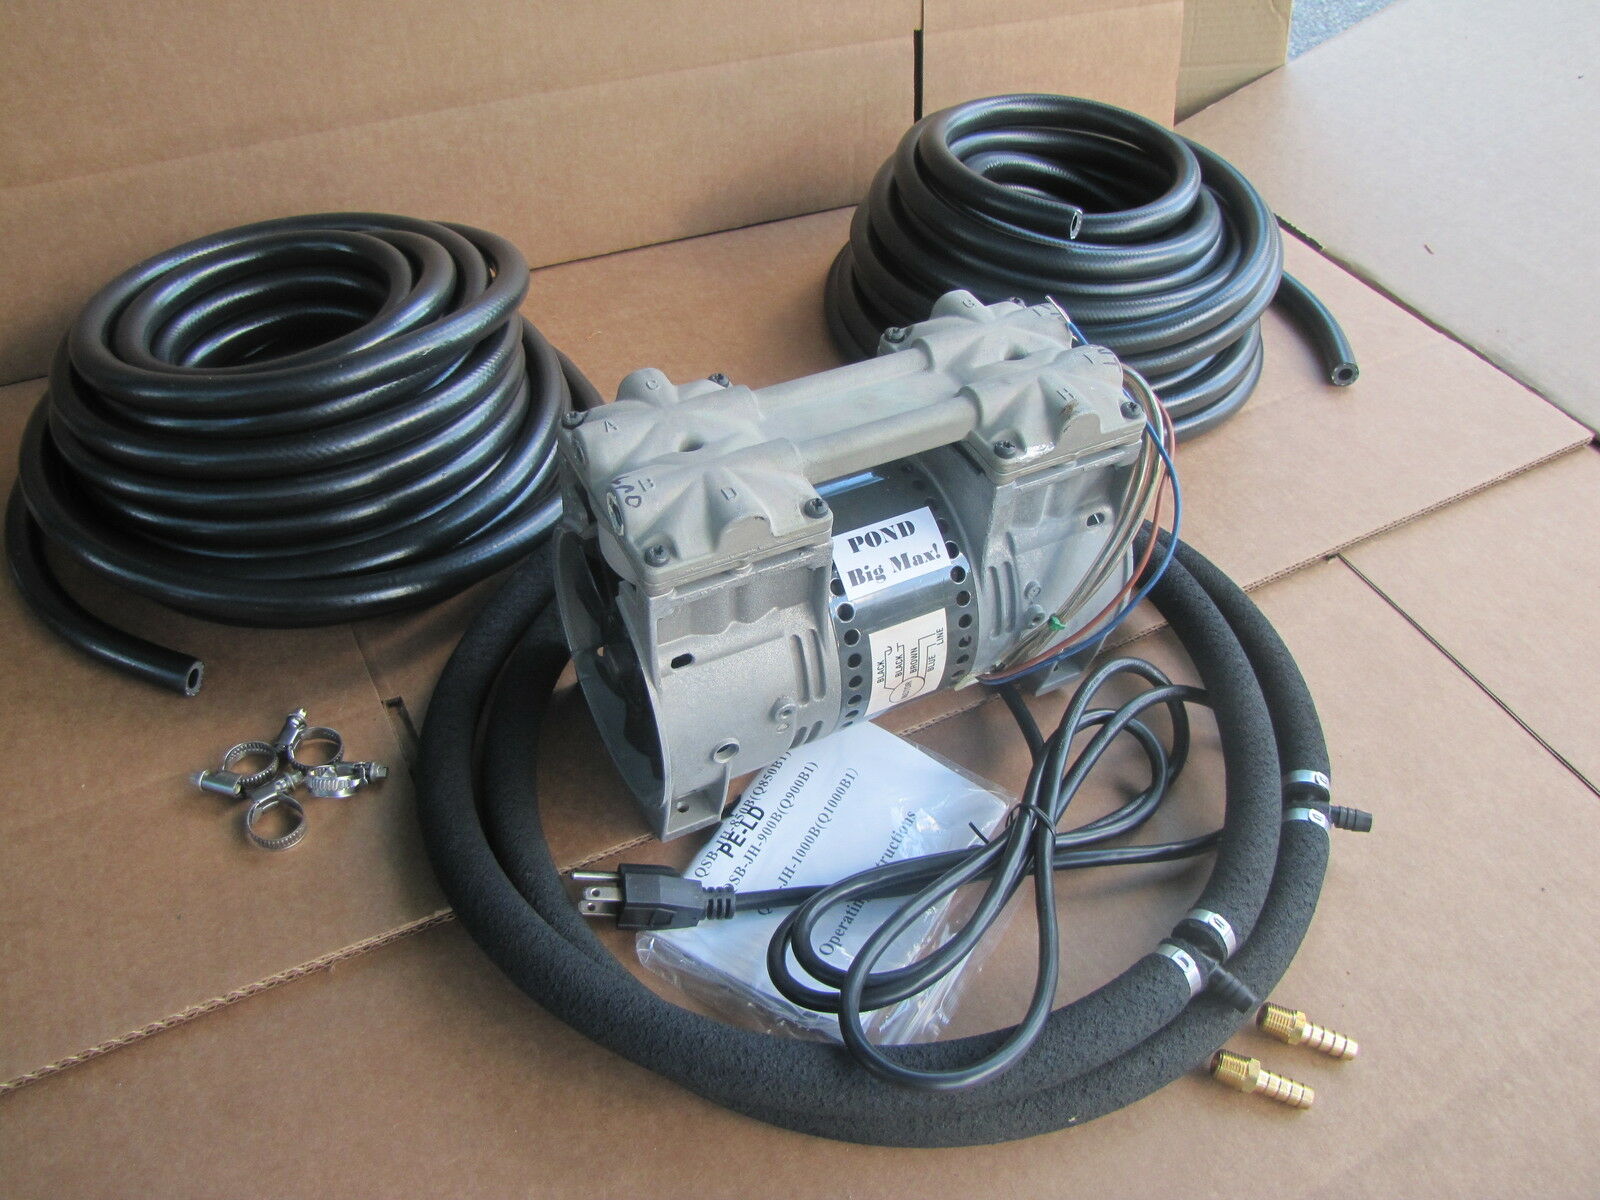 Big Max Large Pond Aeration Aerator System 100ft Weighted Hose + 2 Lg Diffusers!